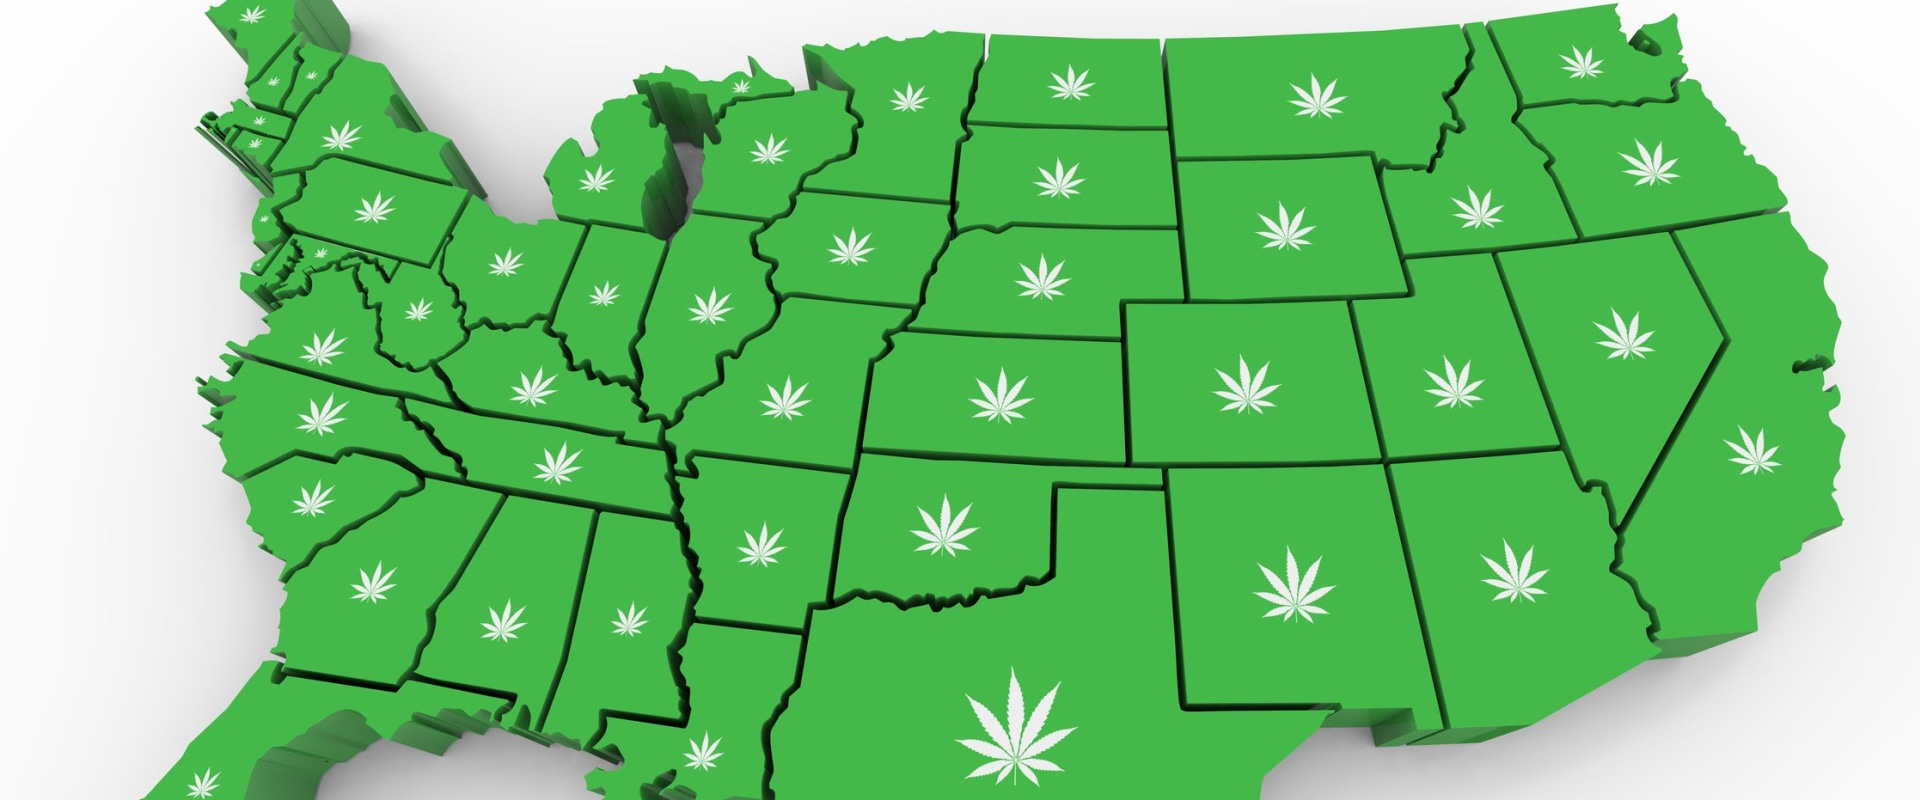 Understanding the Legalization Status of Cannabis in the United States